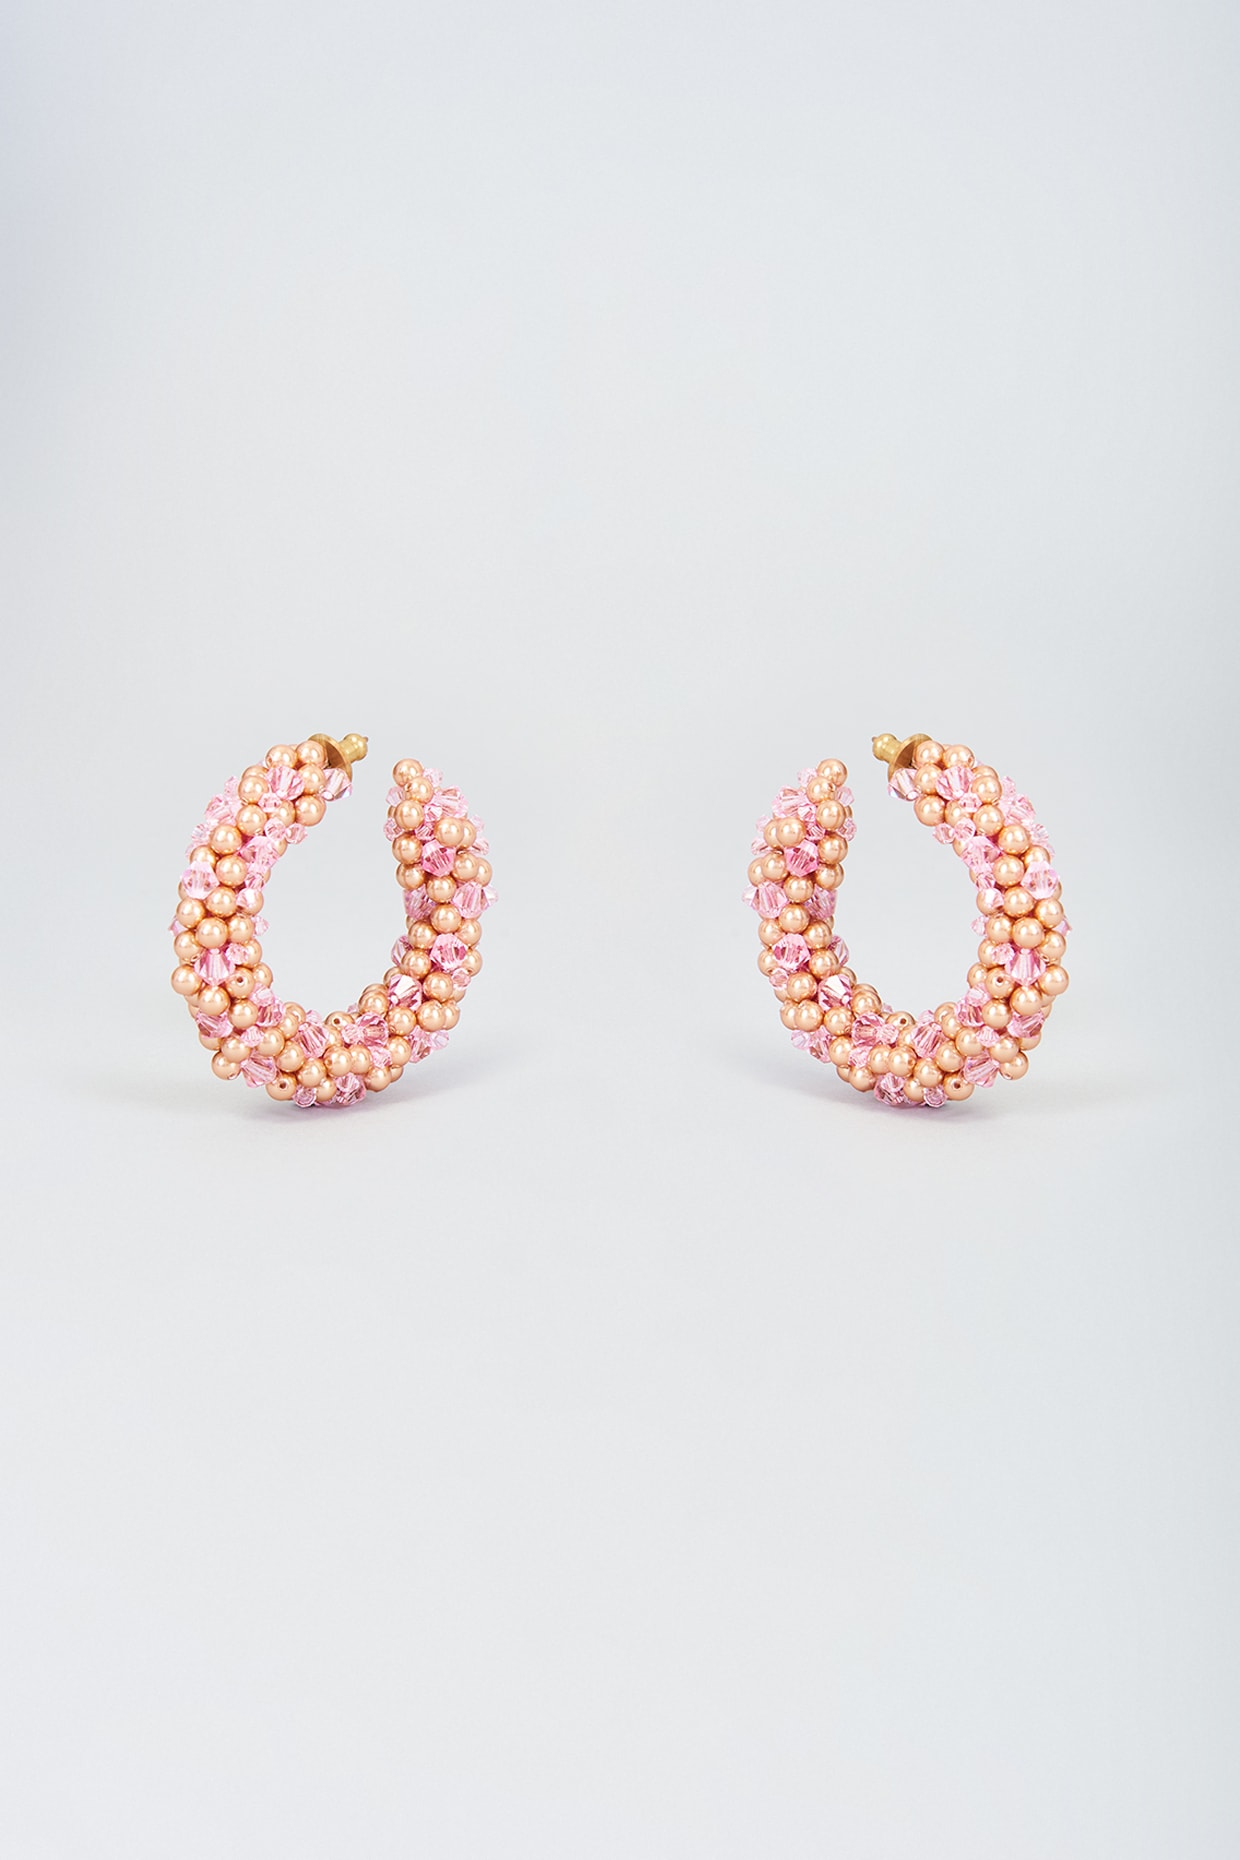 18k Rose Gold Plated Multi Color Inside Out Hoop Earrings Made with  Swarovski  Full On Cinema